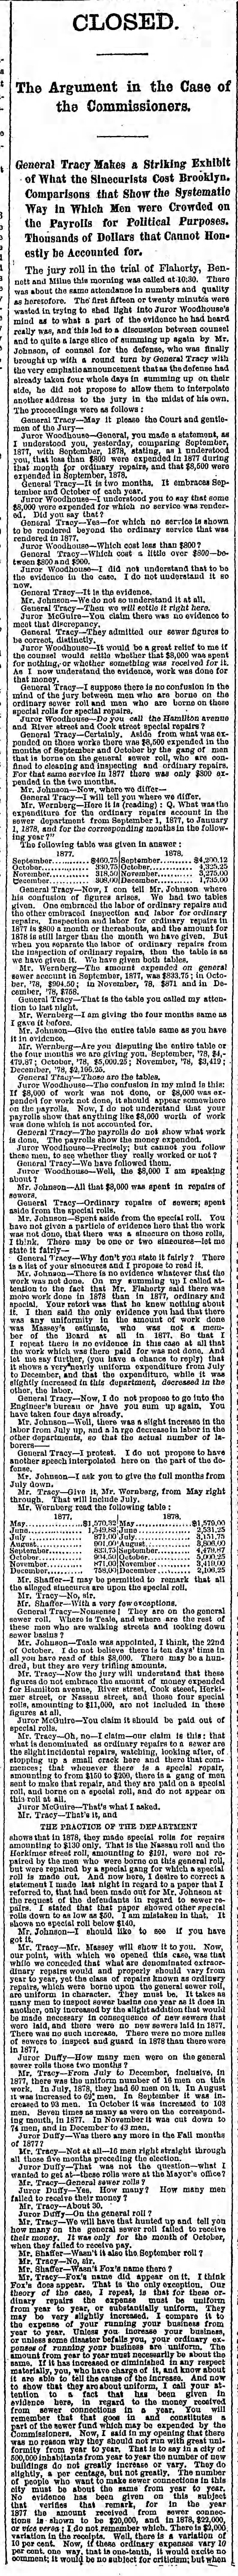 Thursday, May 15, 1879 - Page 4 - 1 of 4